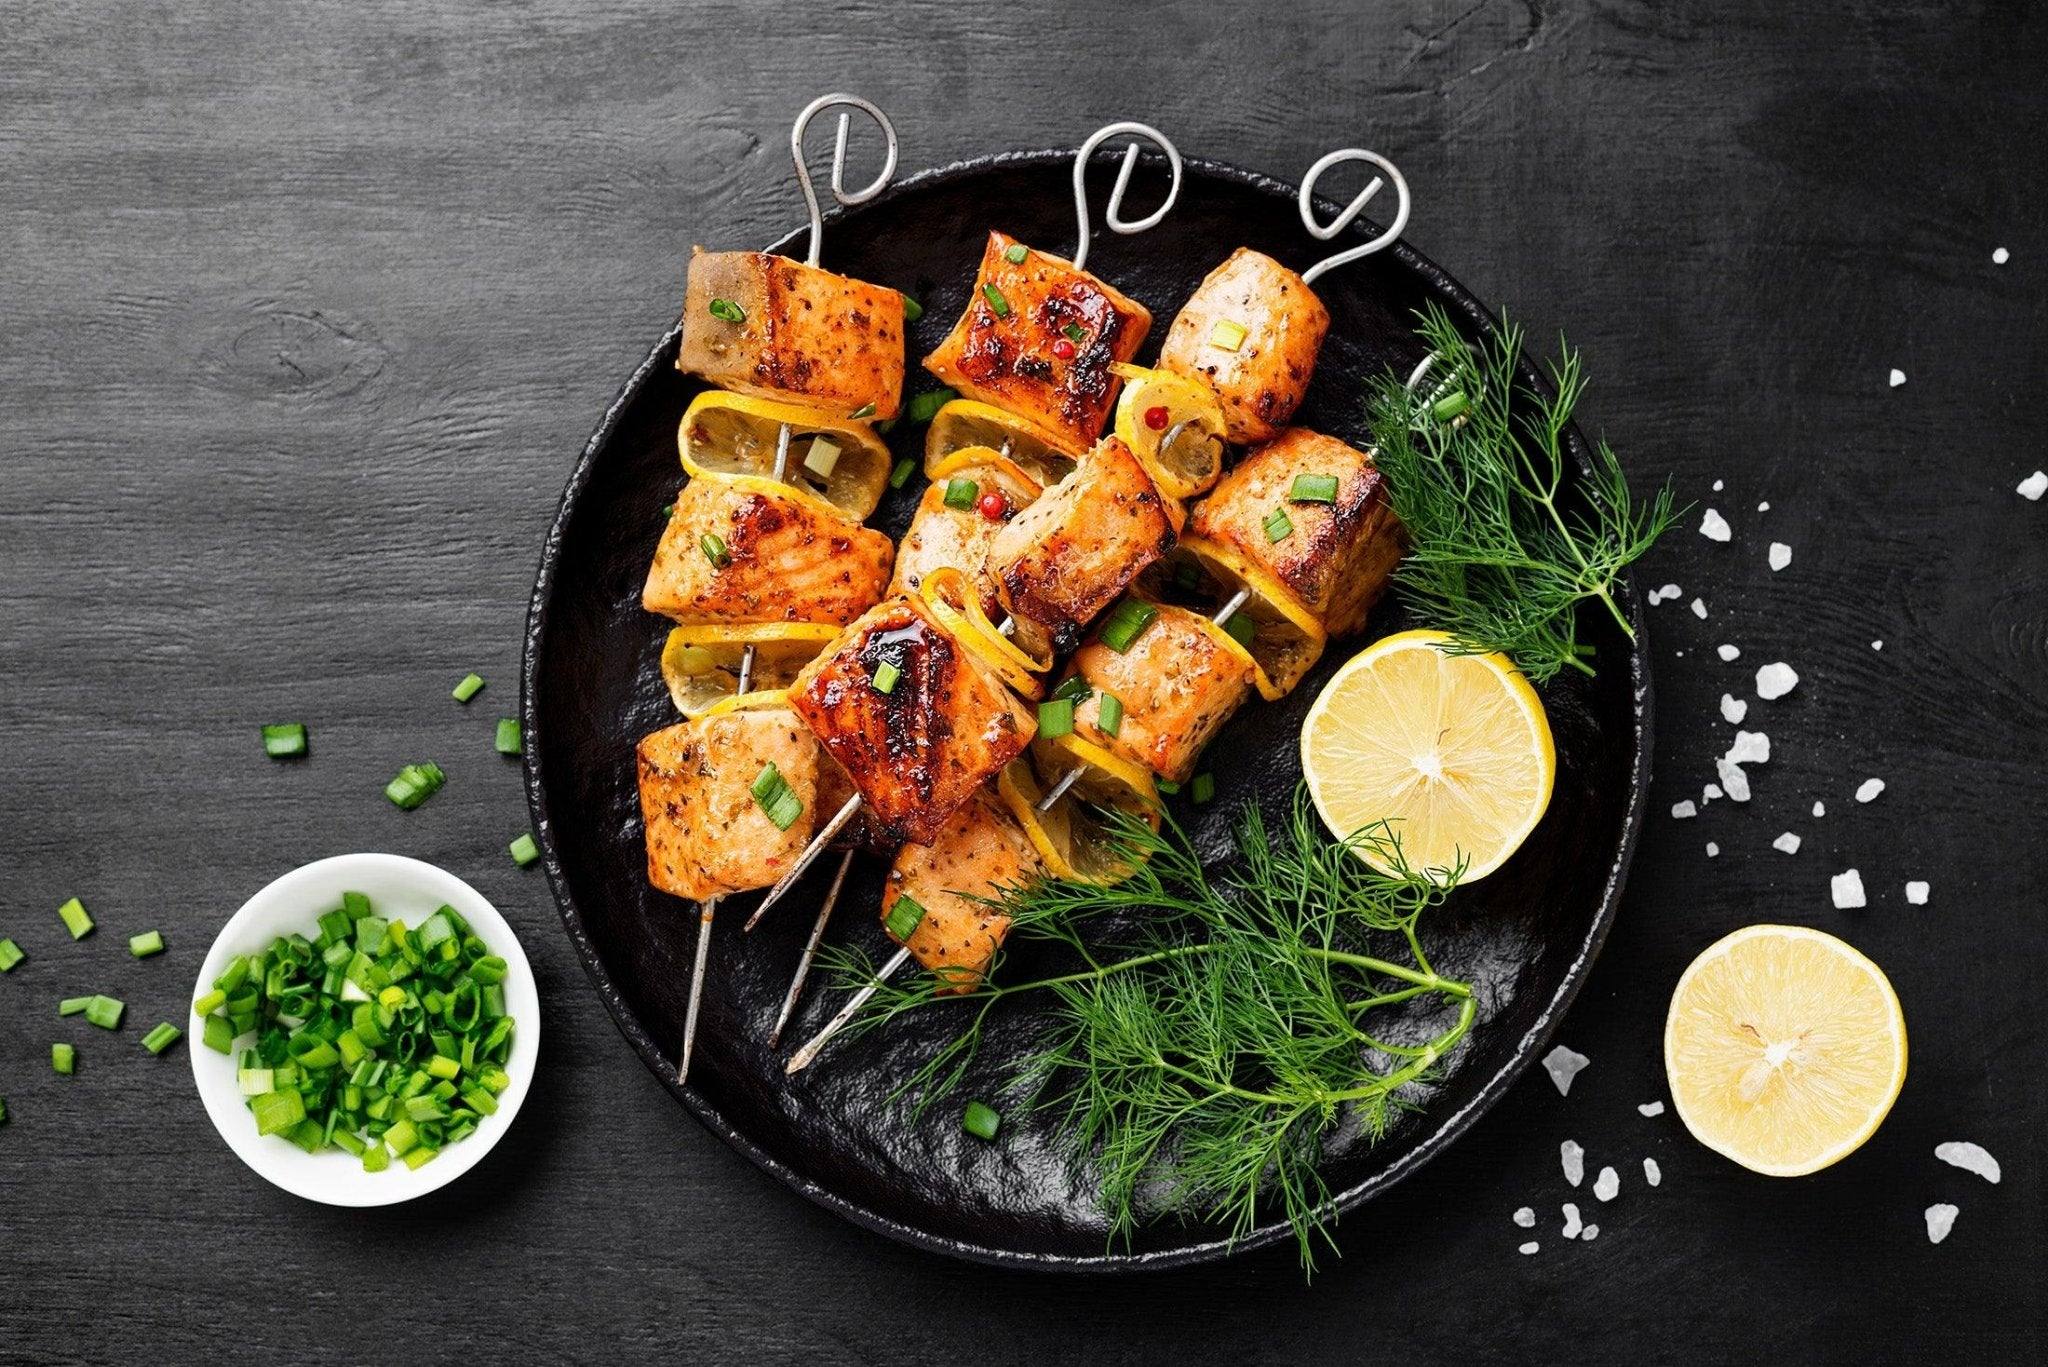 Salmon Skewers with a Tropical Glaze - One Stop Chilli Shop